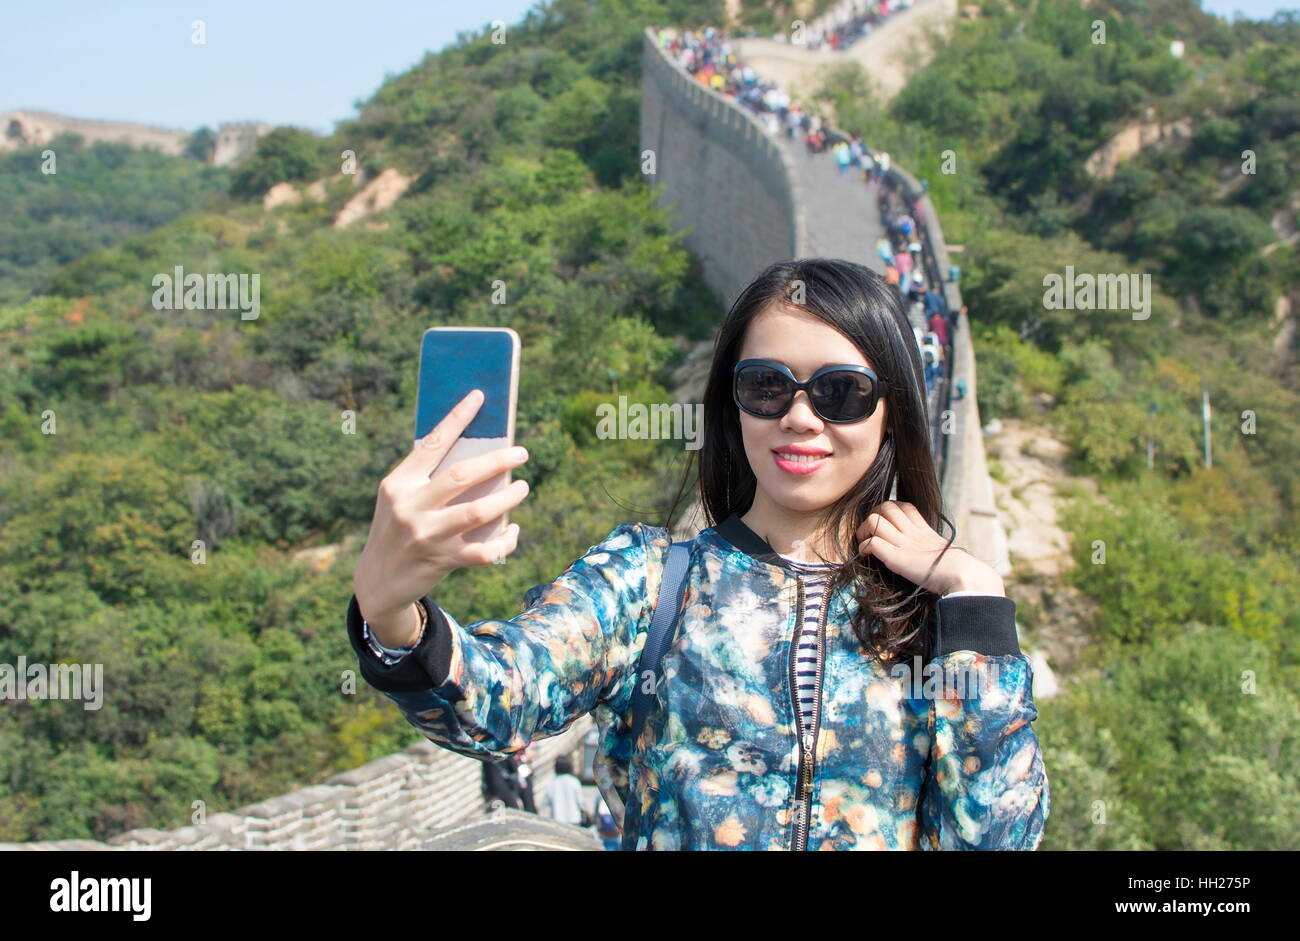 Girl taking selfie at the Great wall of China Stock Photo